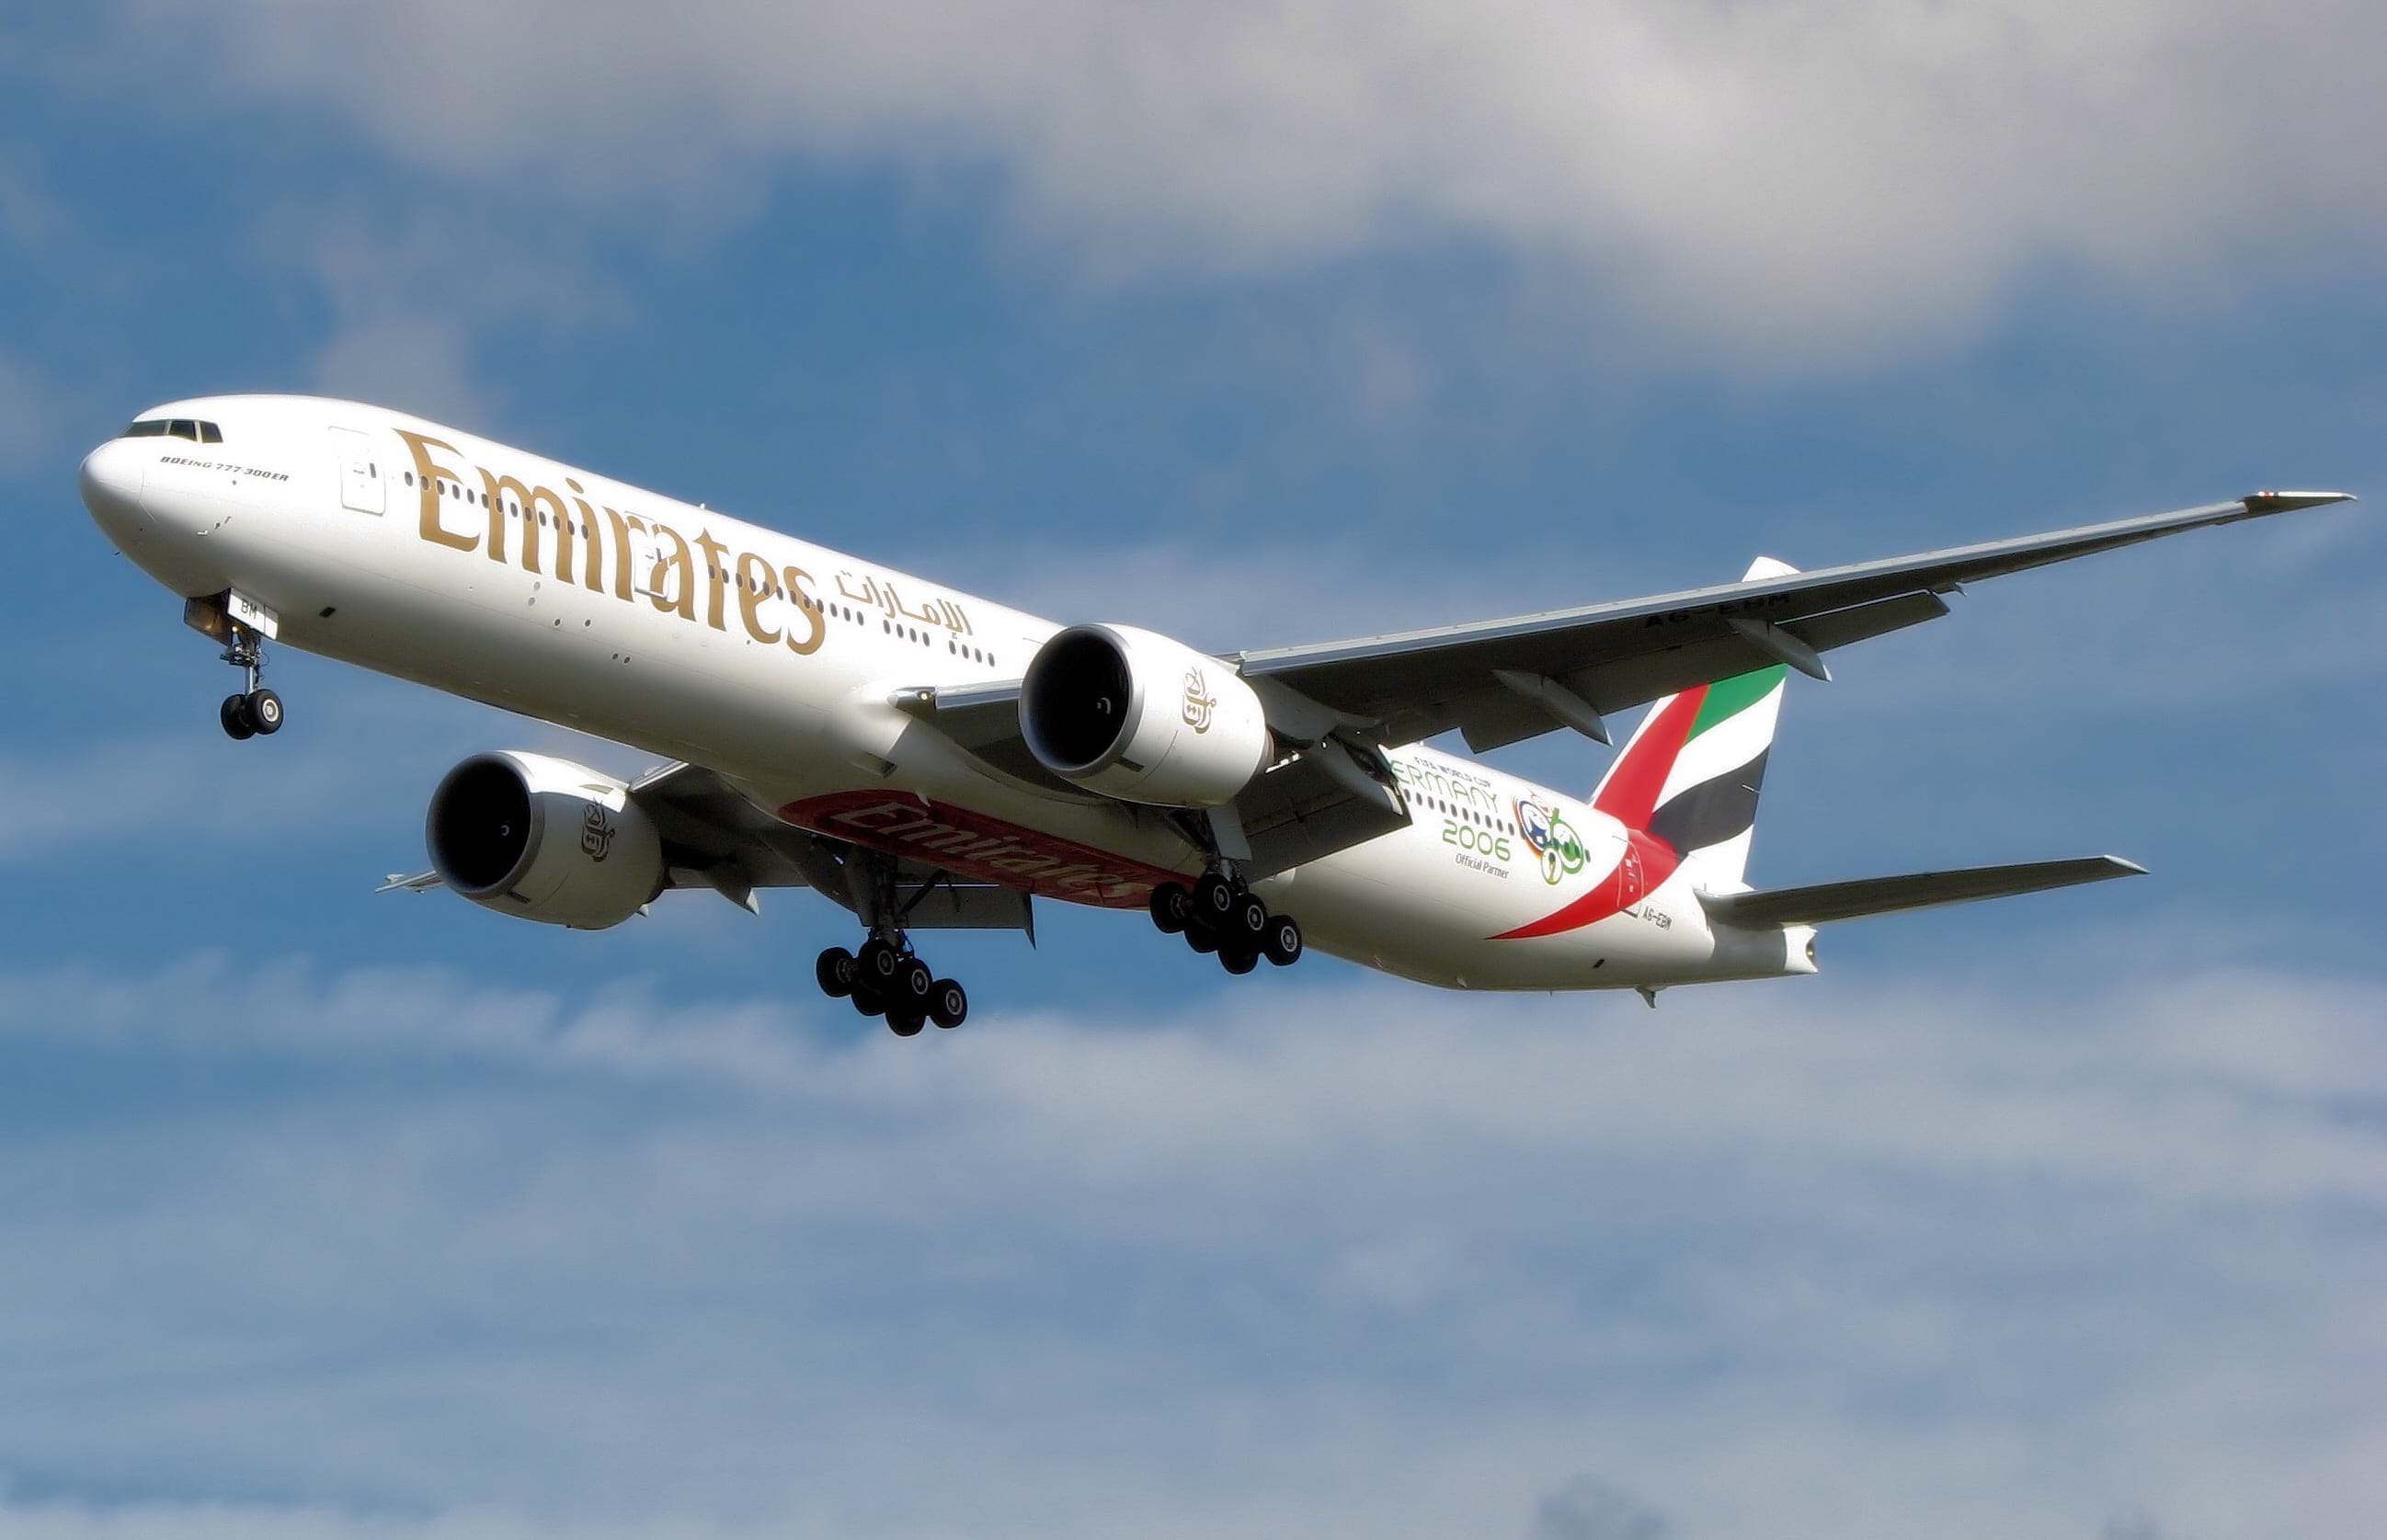 shipping your pets on Emirates airlines